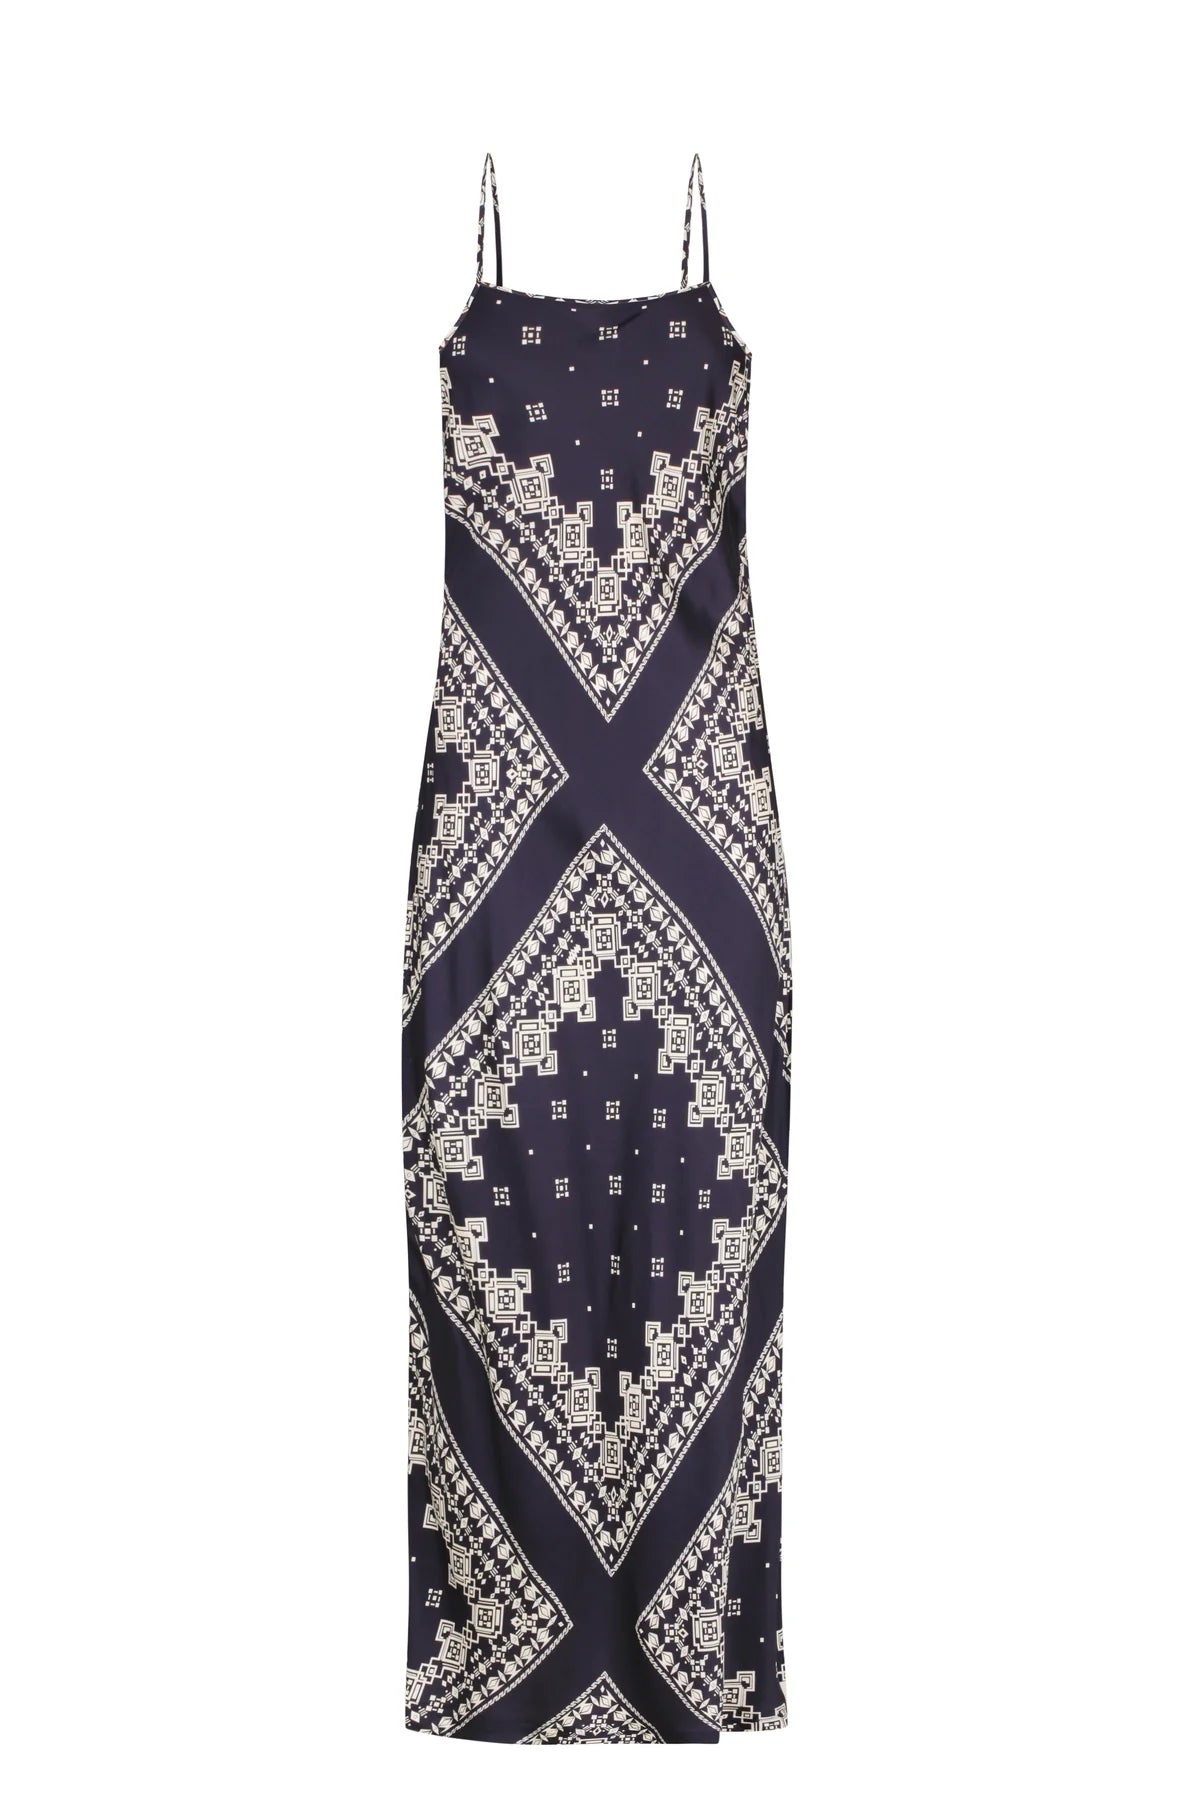 Navy strappy summer dress with white geometric diamond shaped print and adjustable back straps